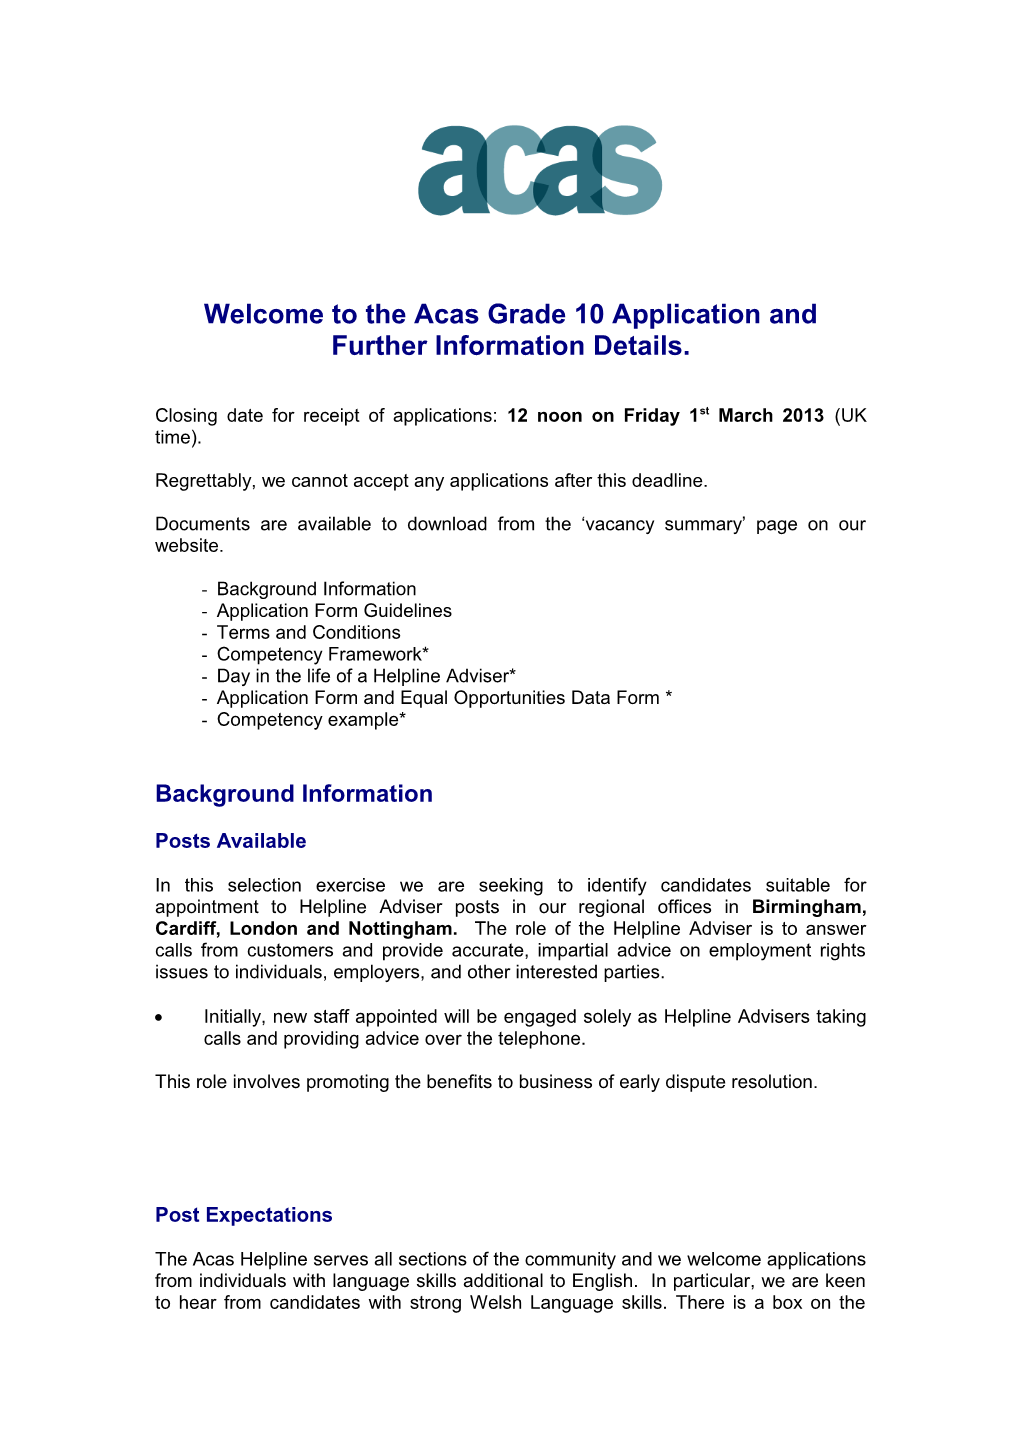 Welcome to the Acas Grade 10 Application Andfurther Information Details